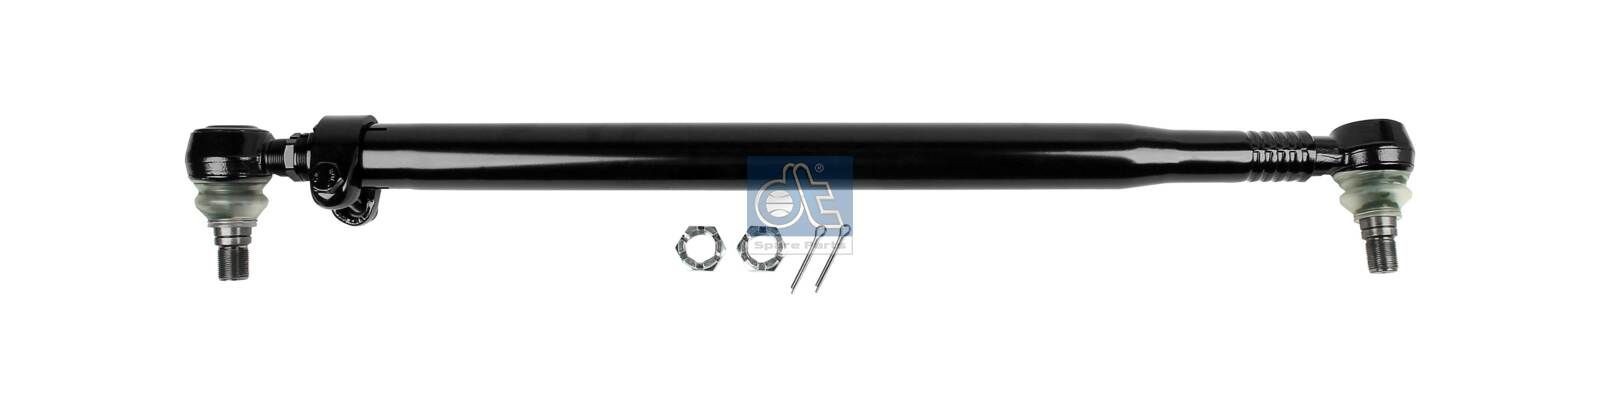 DT Spare Parts 7.13019 Rod Assembly 4129 8449